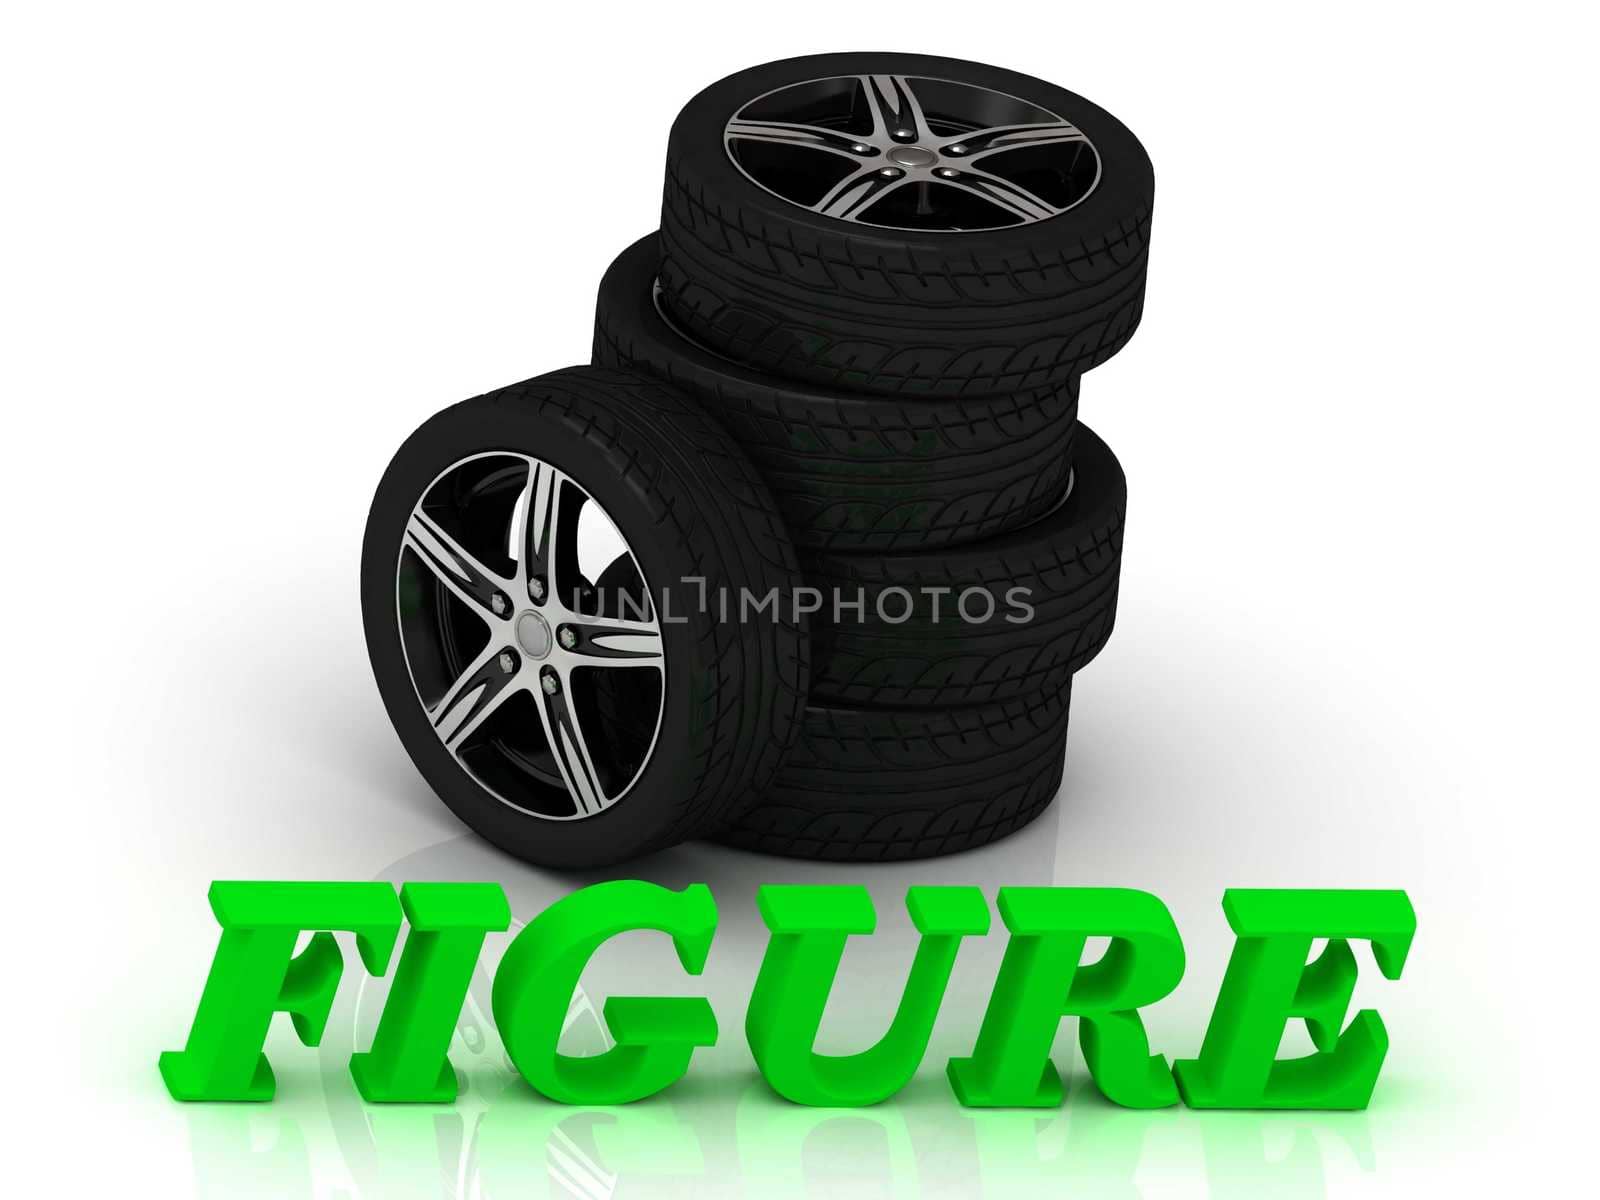 FIGURE- bright letters and rims mashine black wheels on a white background